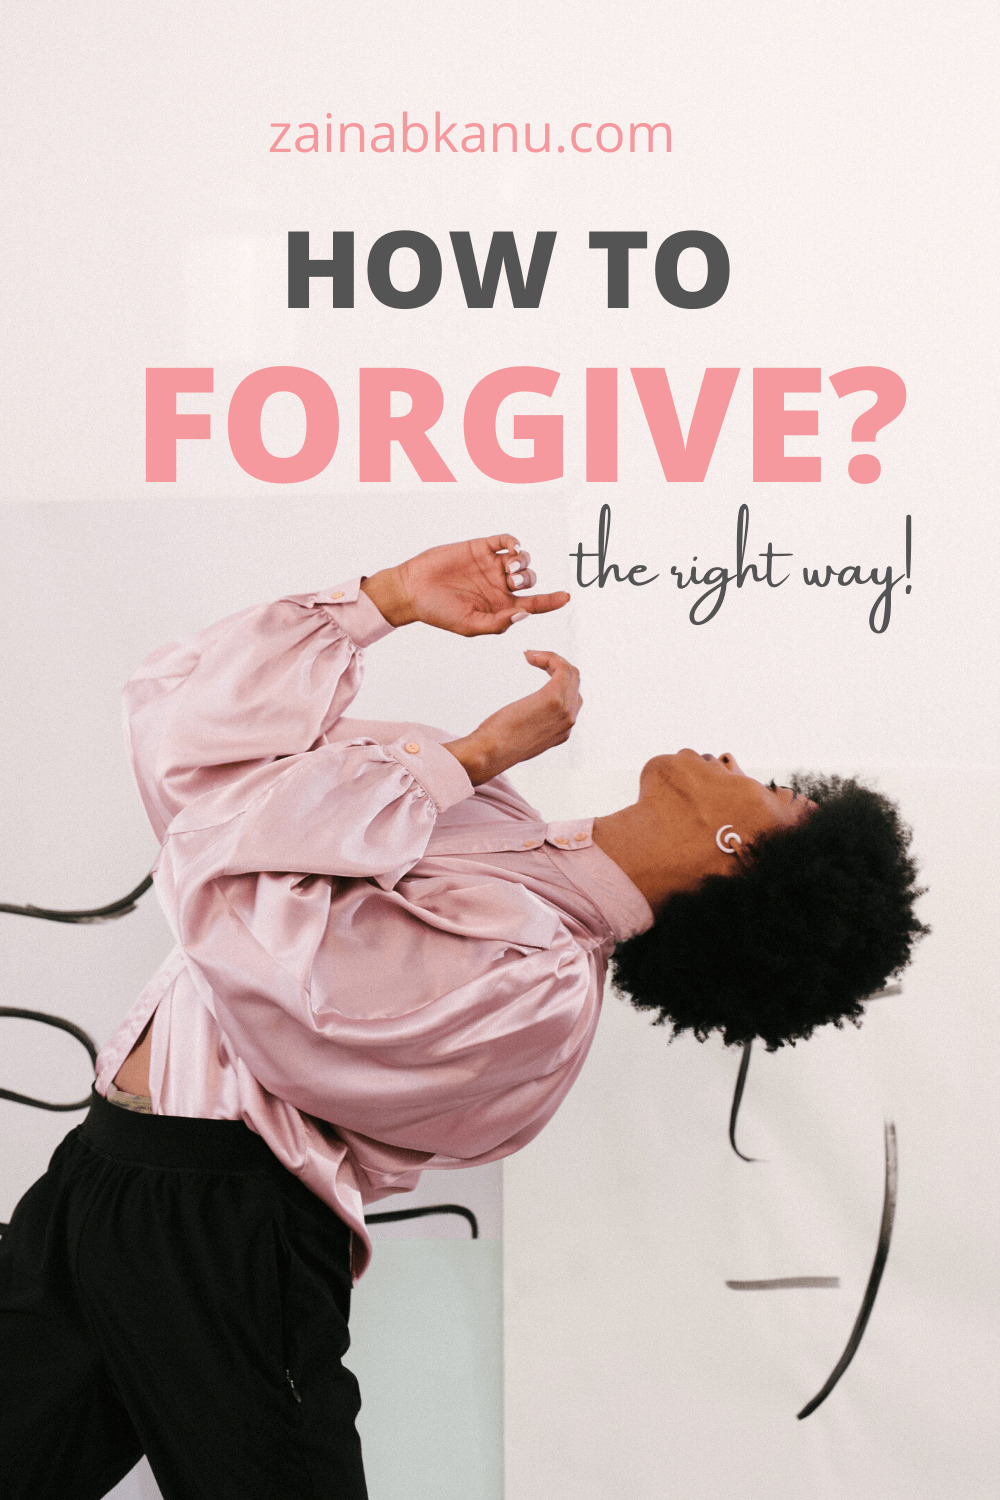 7-2 How to finally forgive others and move on in life?